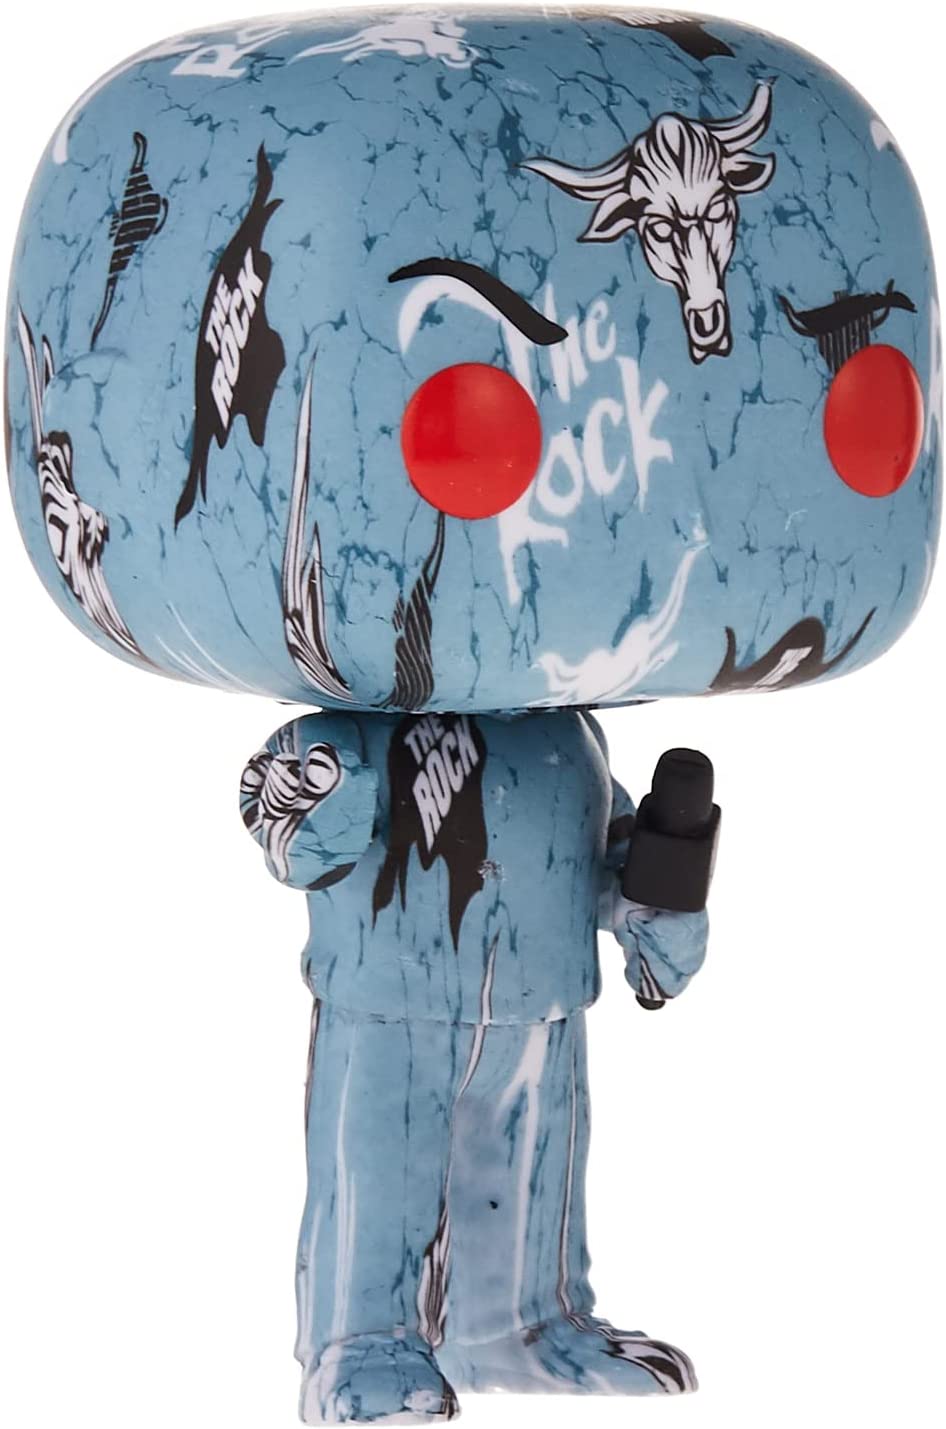 Funko Pop Art Series | WWE | The Rock Exclusive with Stack Pop Protector #44